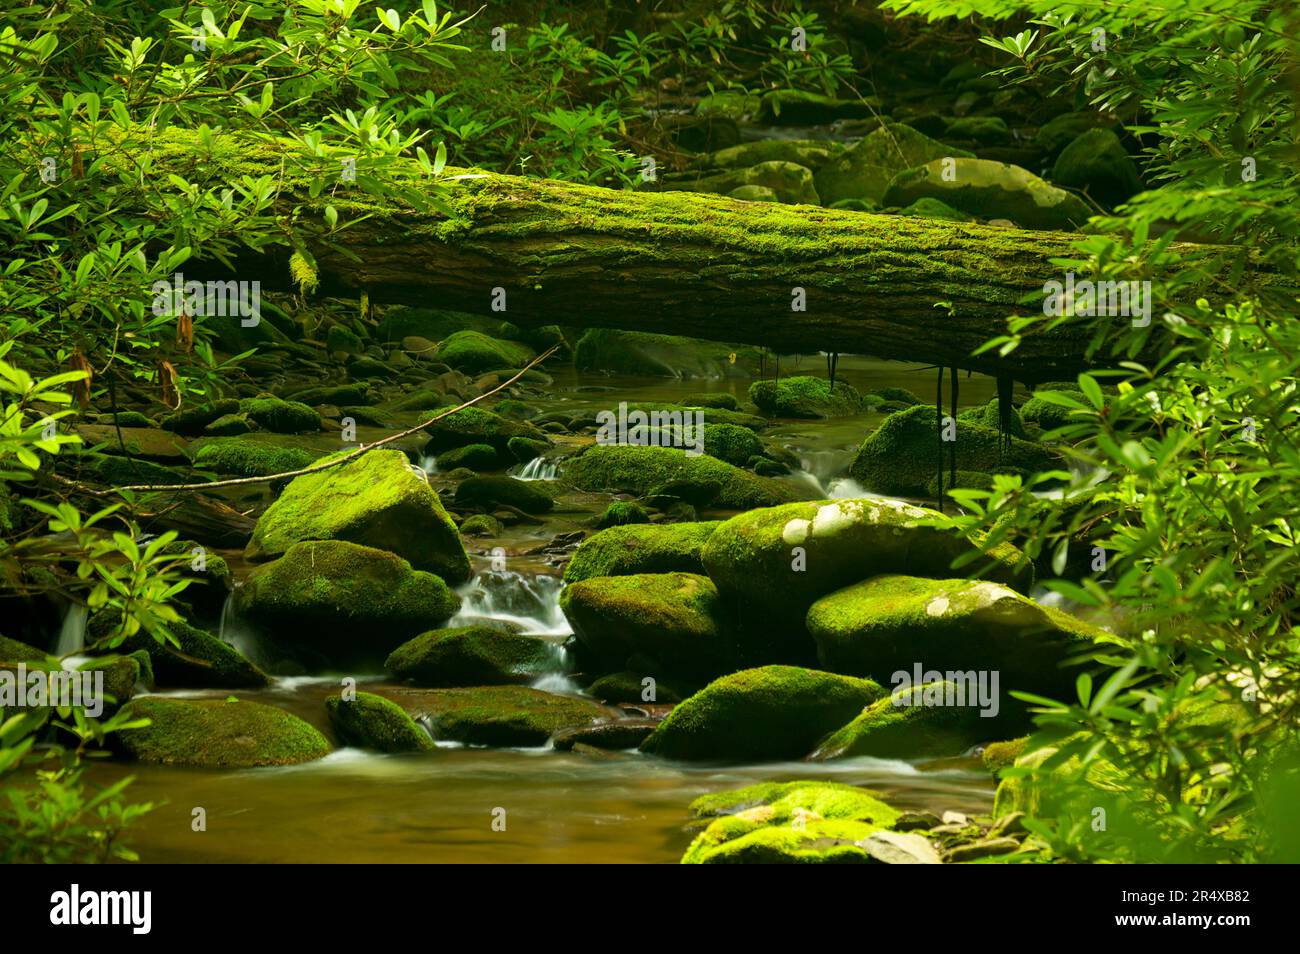 Moss-covered rocks and a tree trunk over a stream in Great Smoky Mountains National Park, Tennessee, USA; Tennessee, United States of America Stock Photo